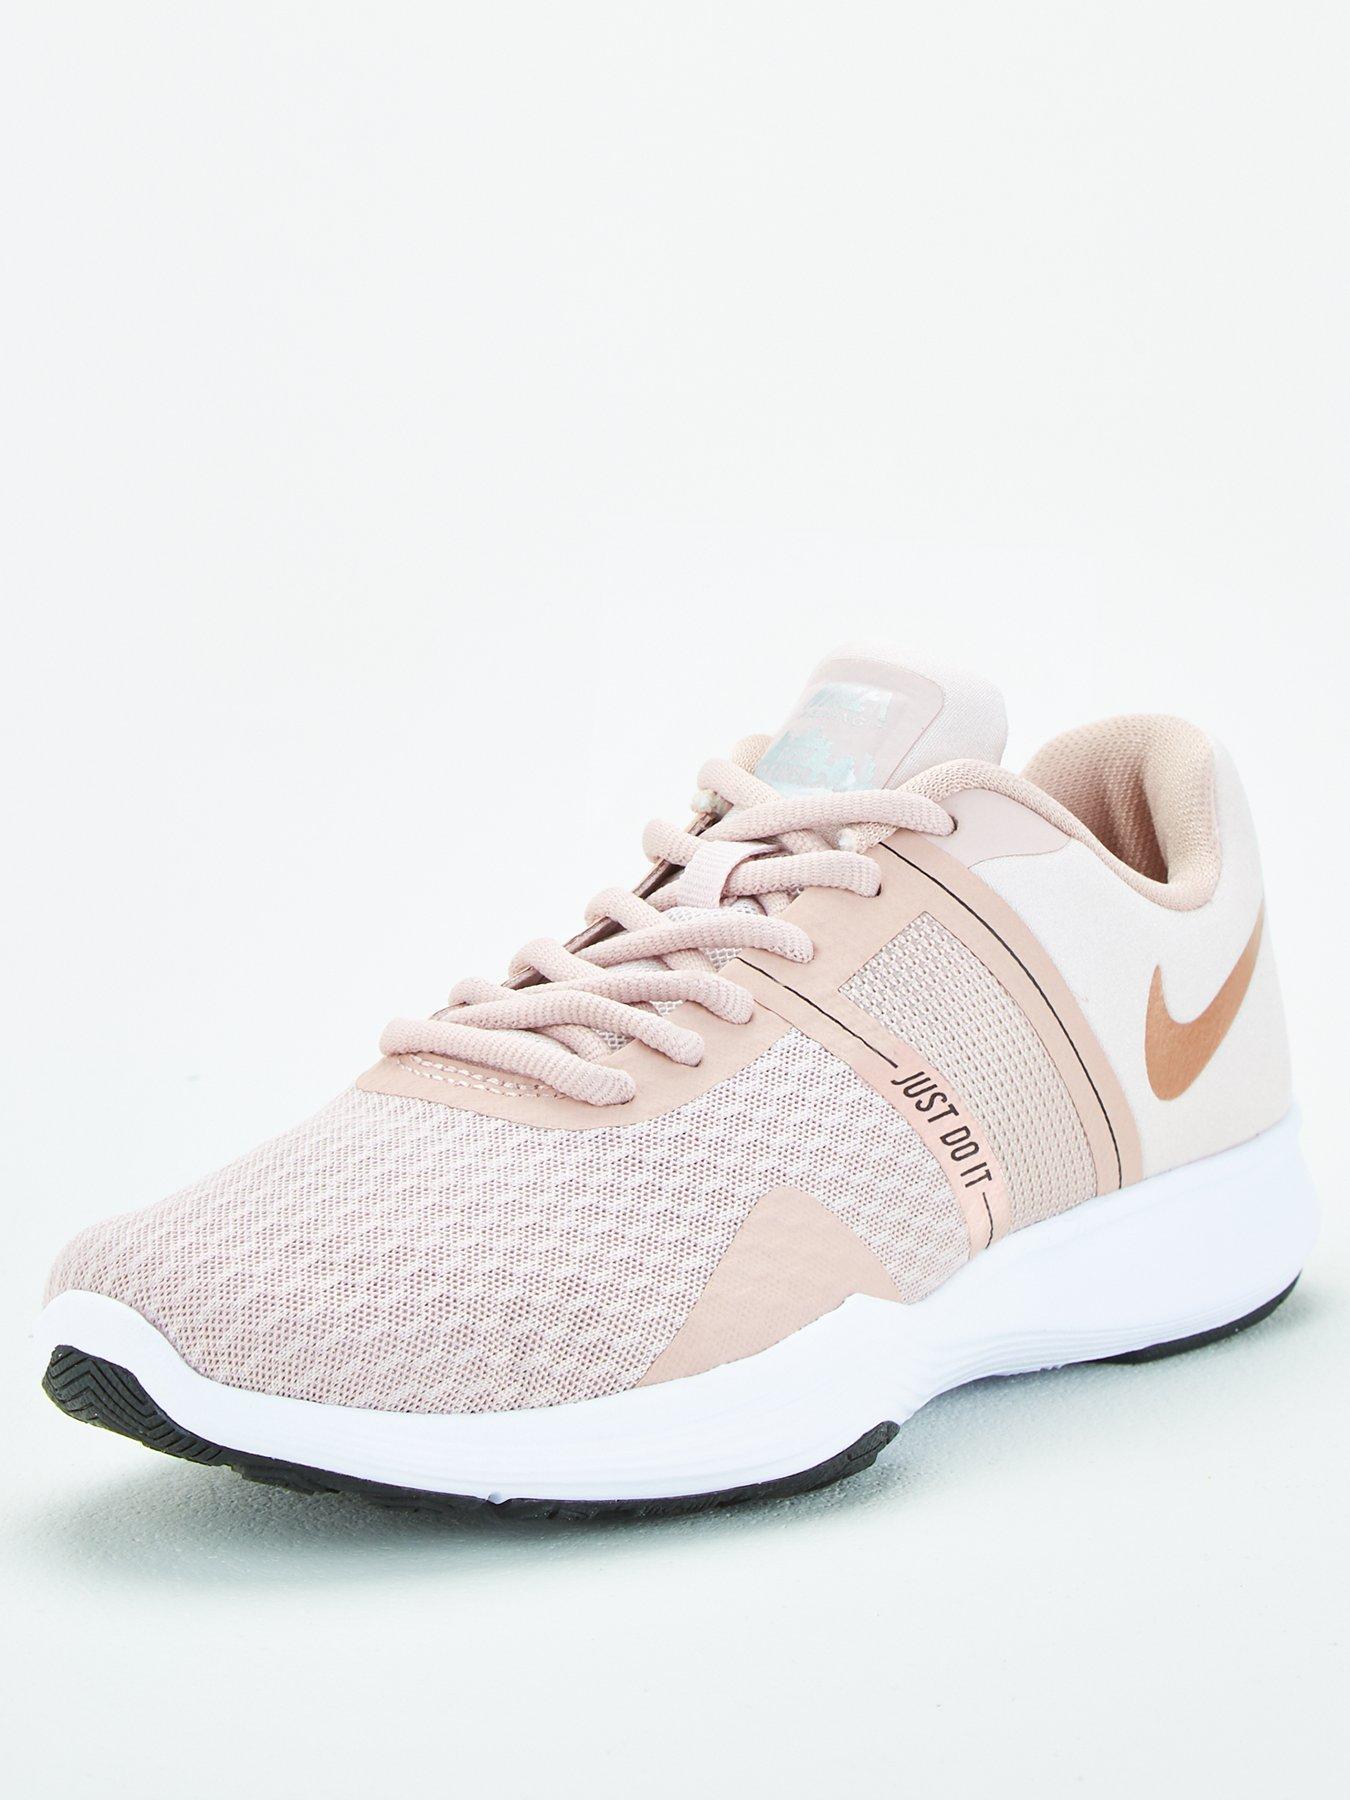 nike train pink city trainer 2 trainers